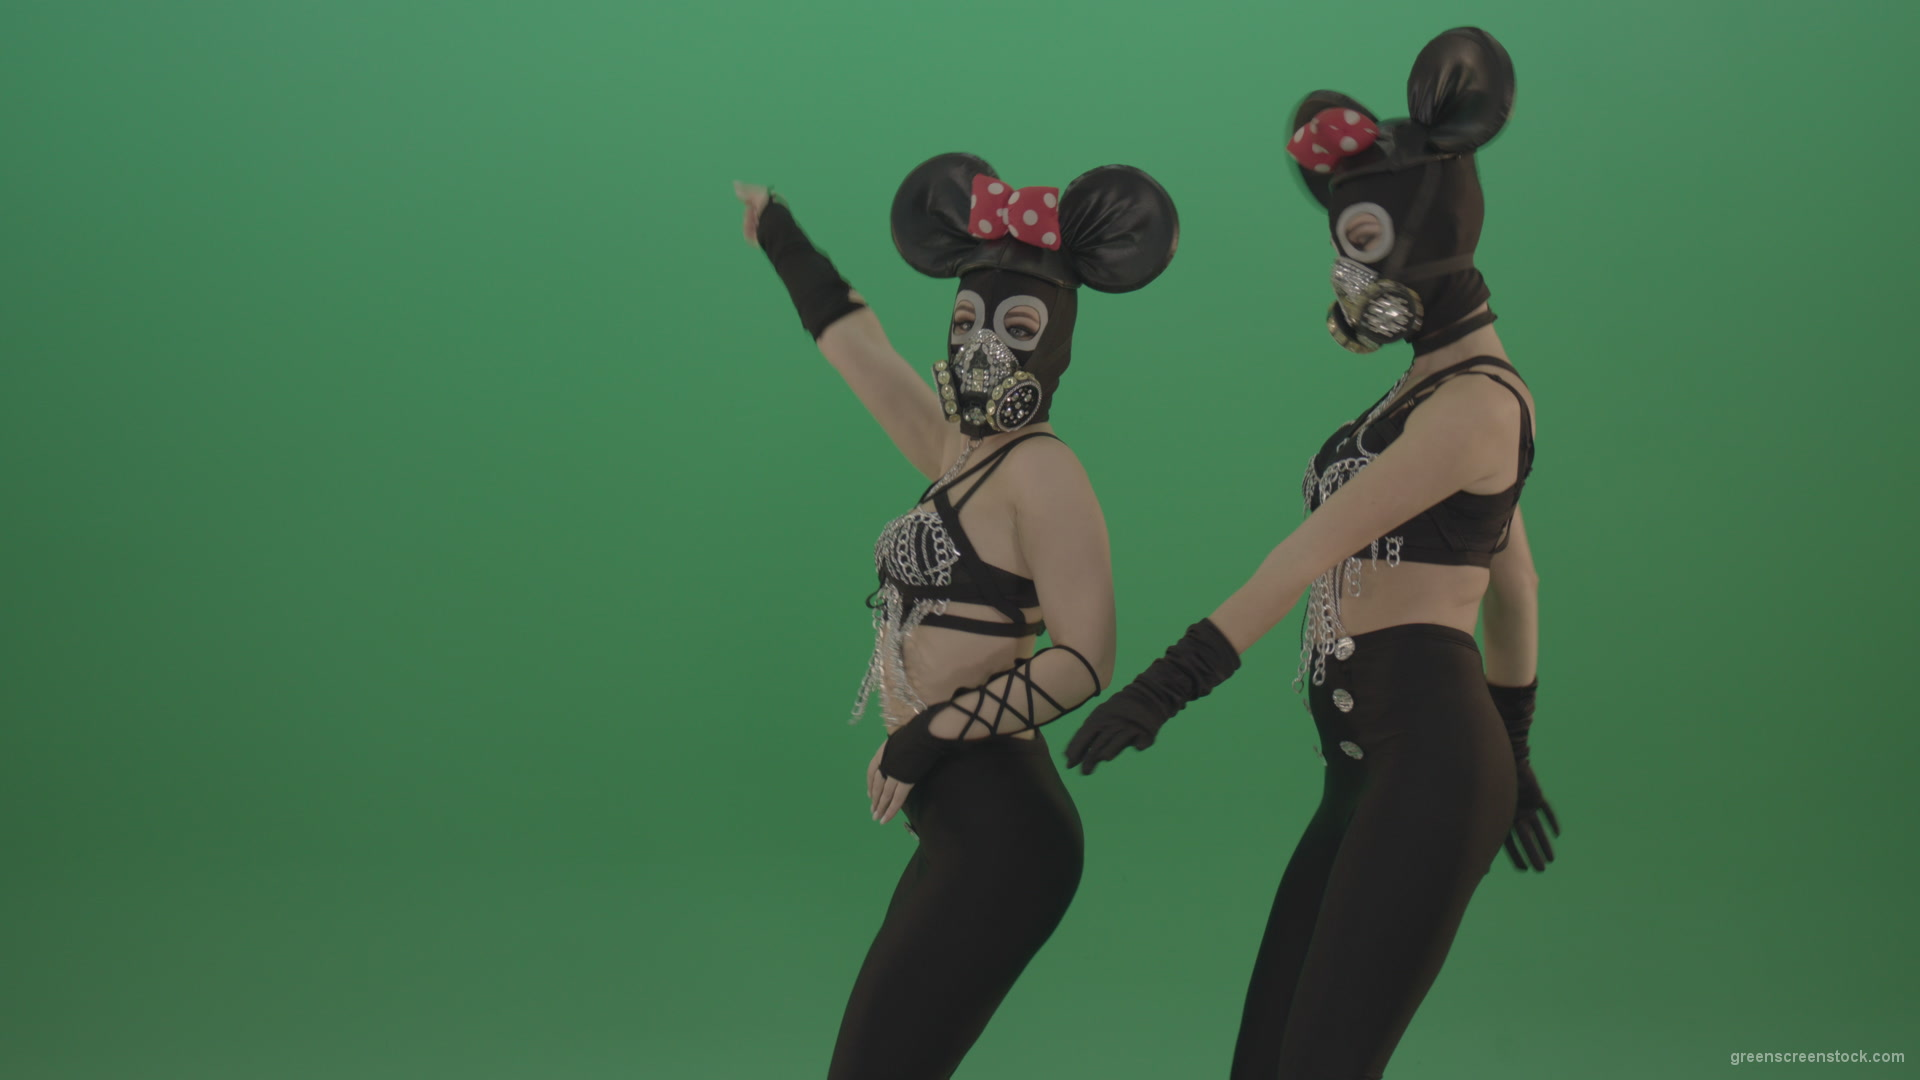 Girls-dressed-Mickey-Mouse-dance-well-on-green-screen_007 Green Screen Stock